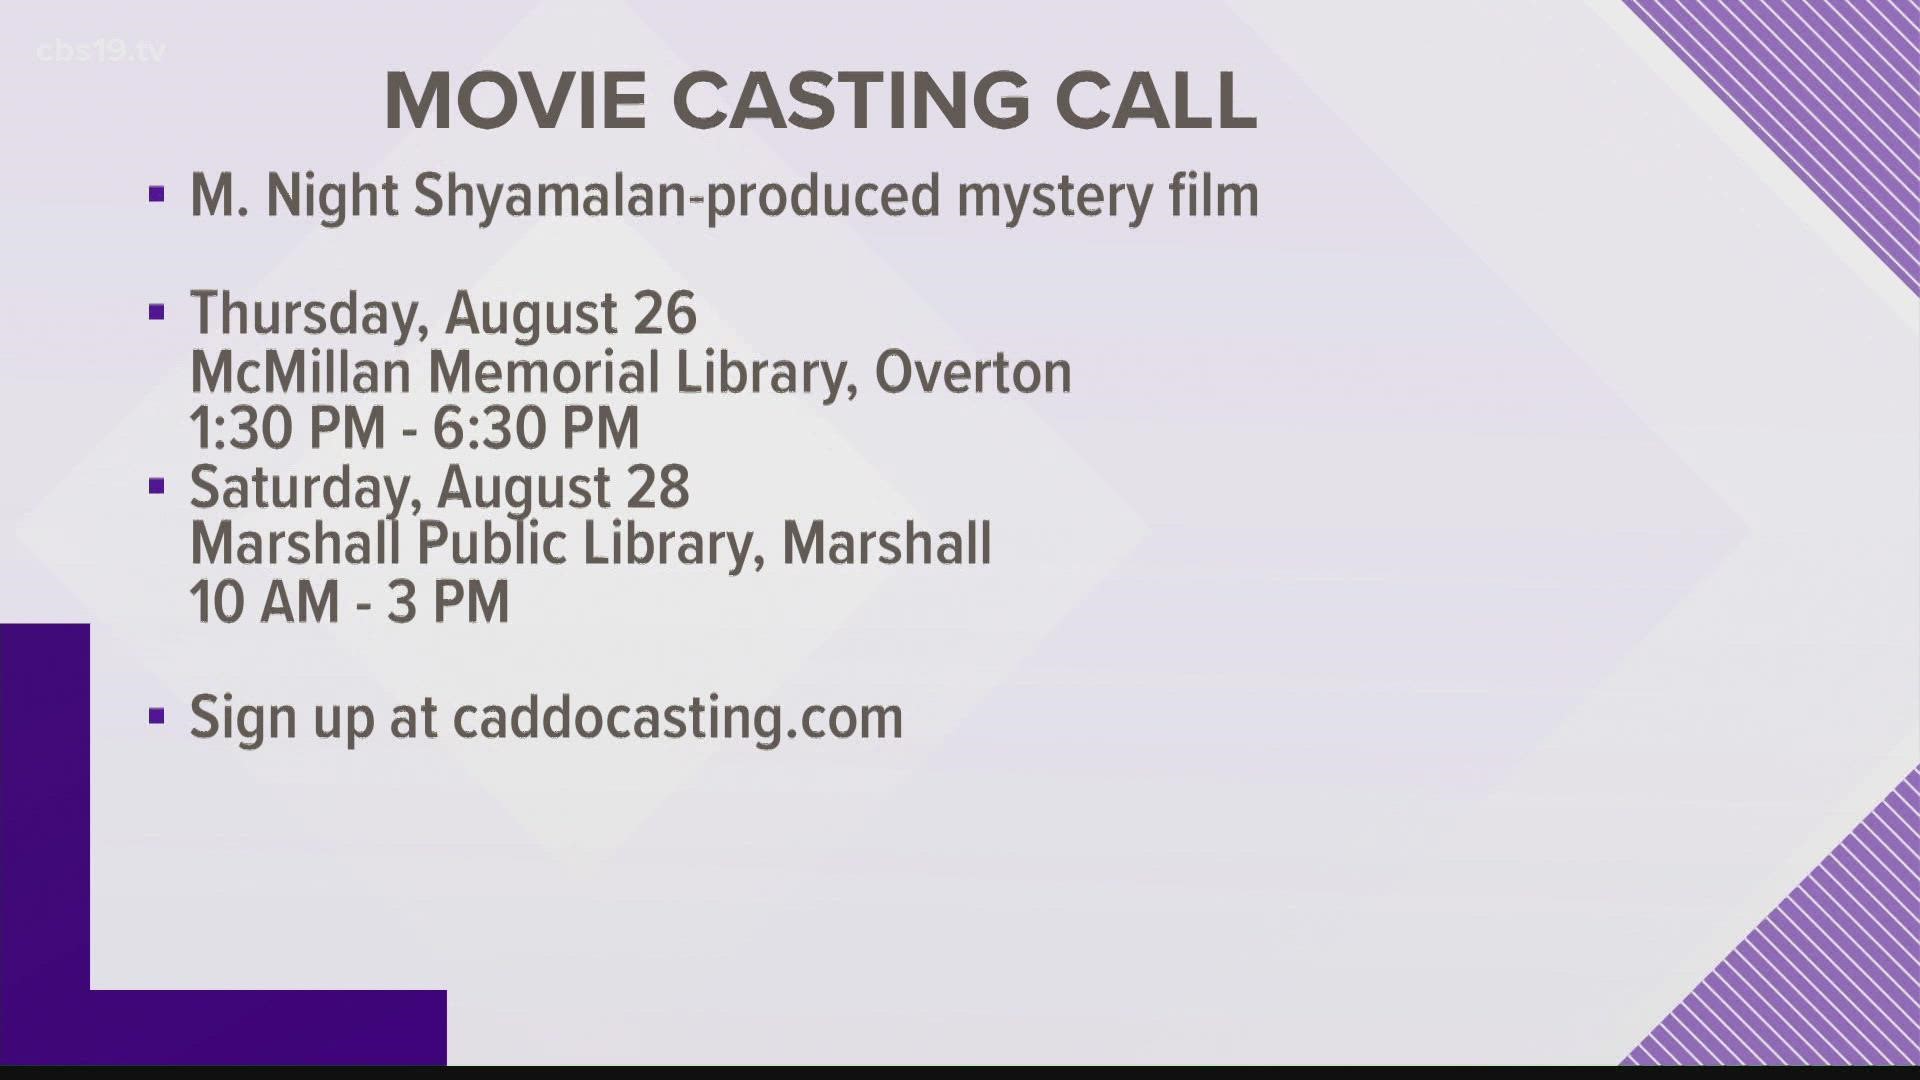 For more information on the film or auditions, visit caddocasting.com.